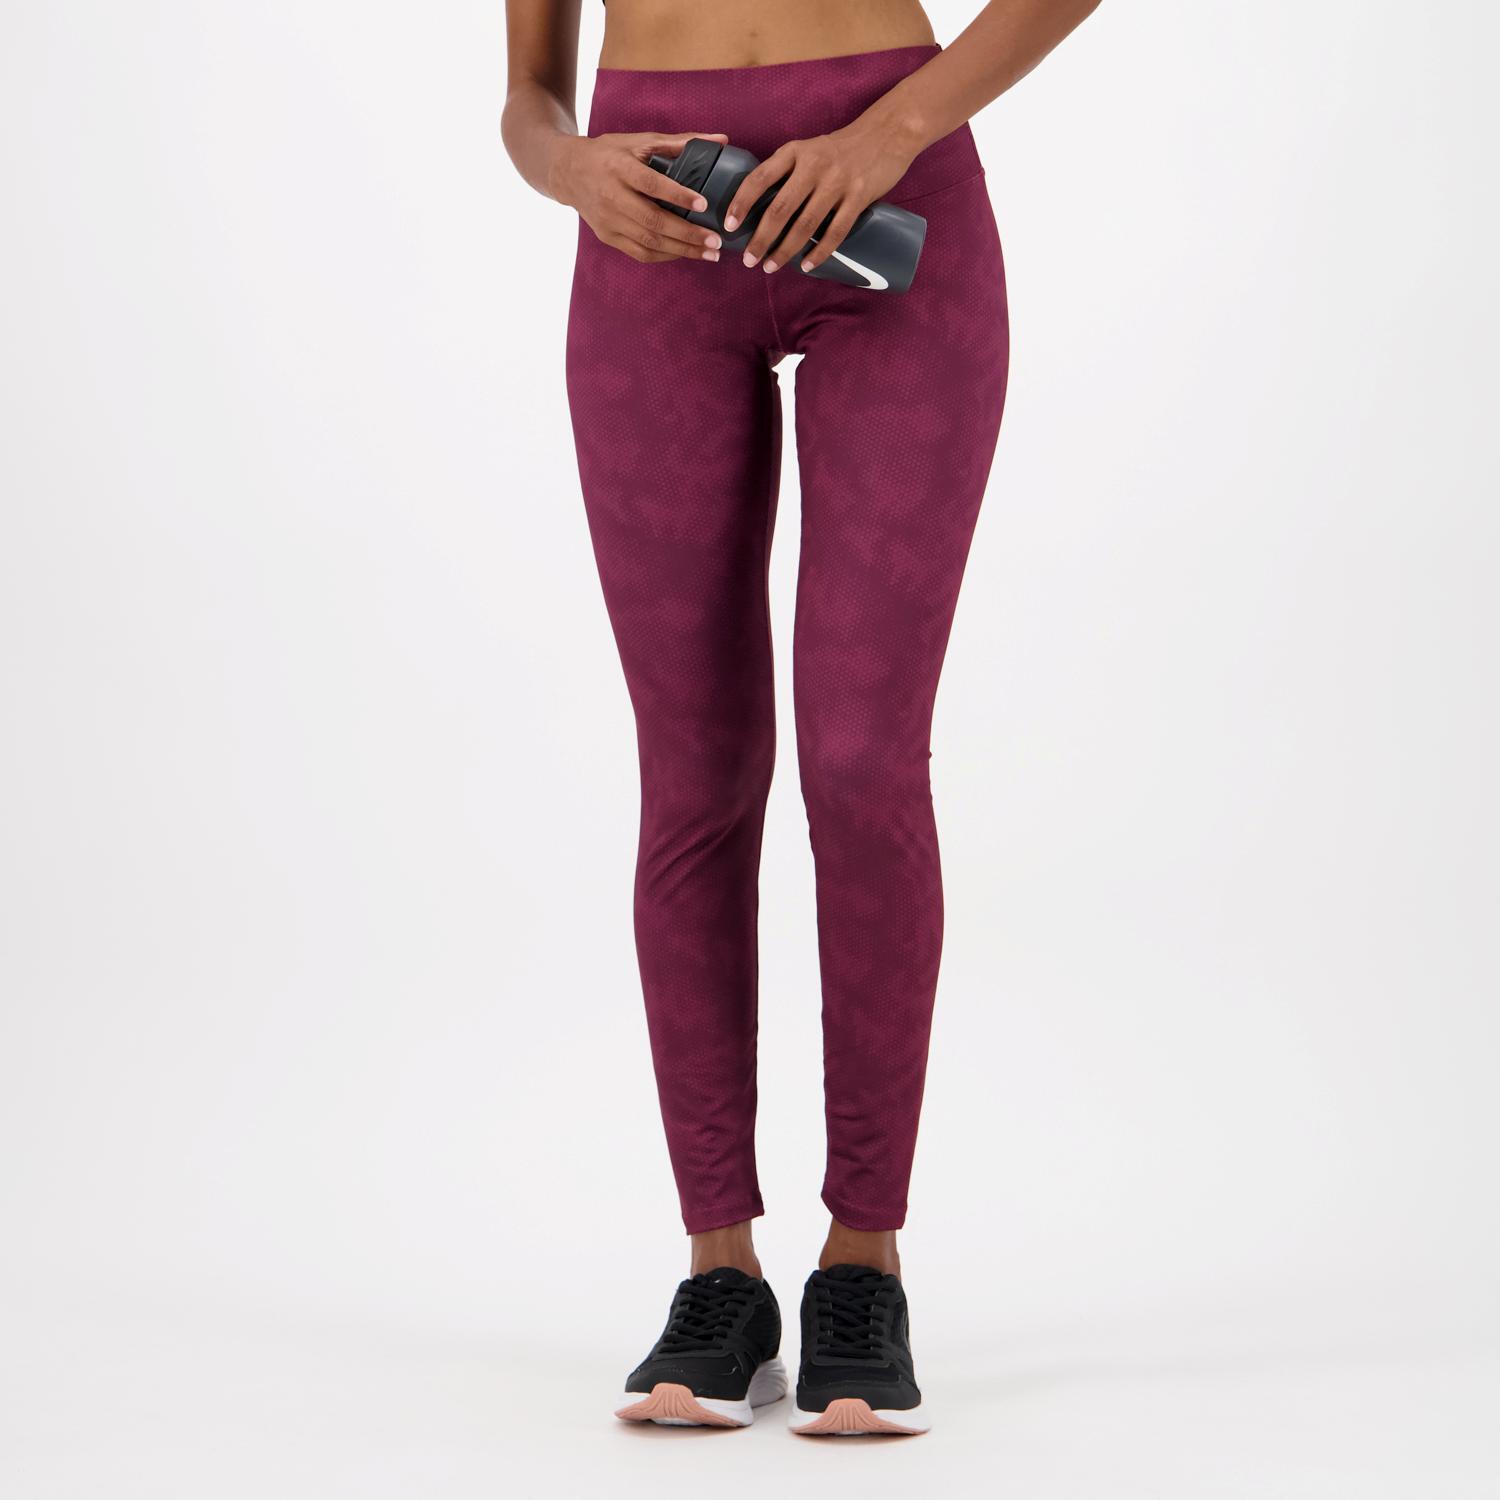 Doone Supportive - Negras - Mallas Fitness Mujer